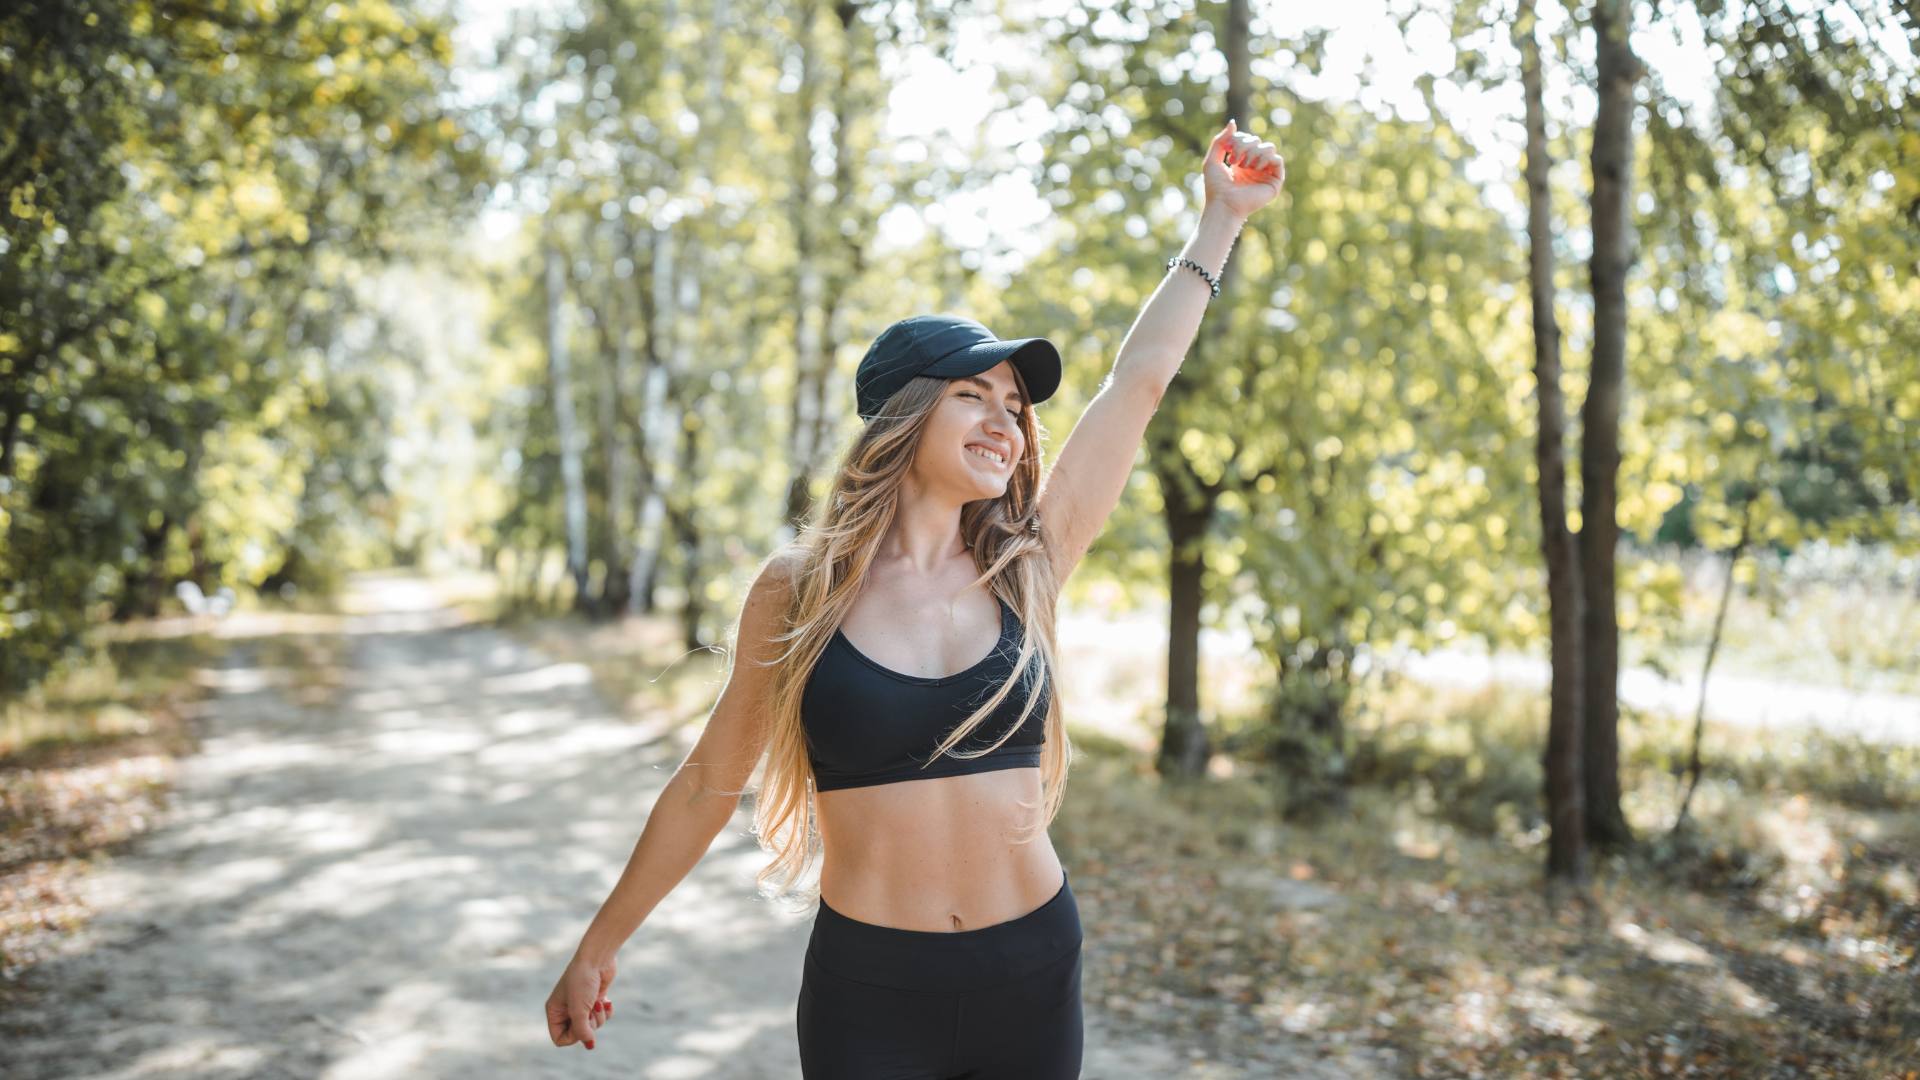 A woman wears black workout gear on a walk, demonstrating how to fast and become fasted adapted.